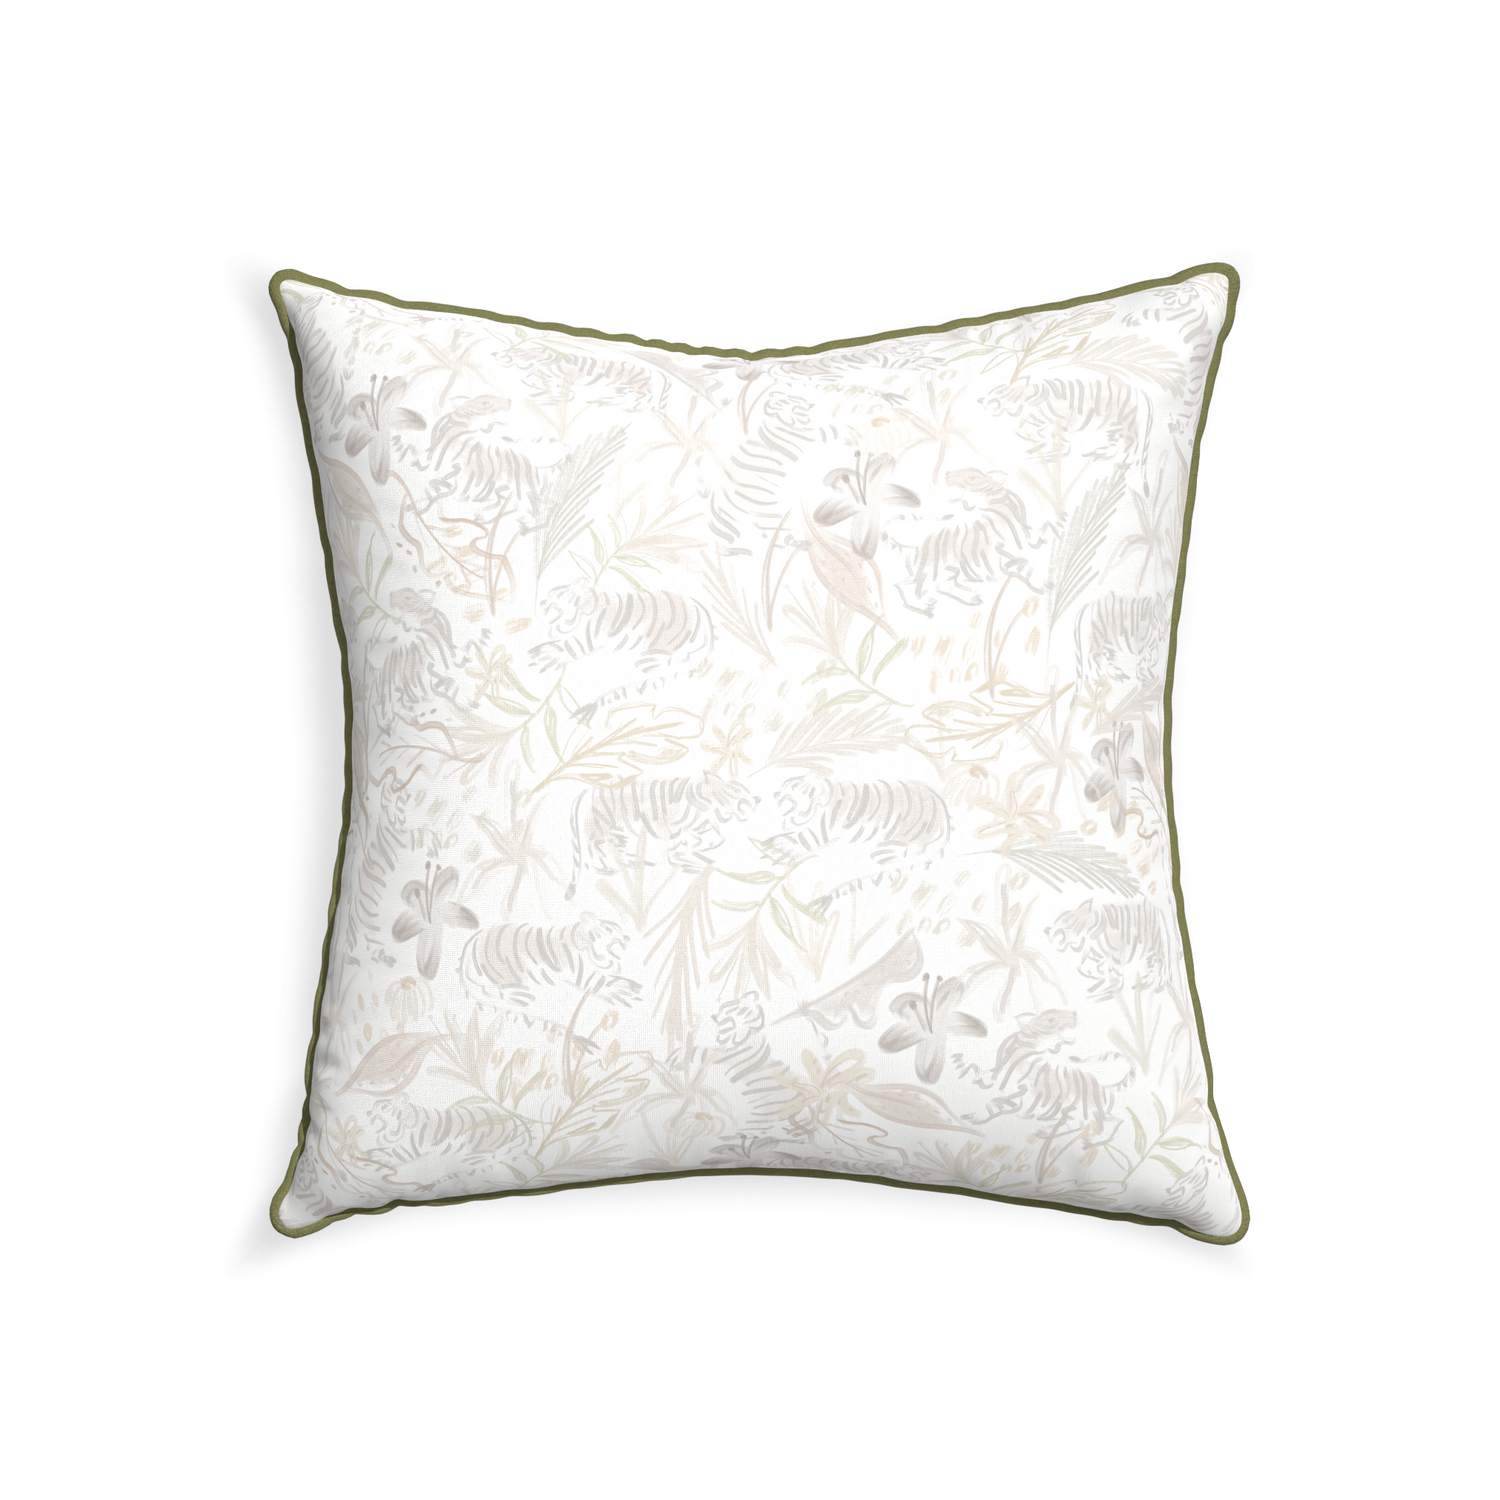 22-square frida sand custom pillow with moss piping on white background